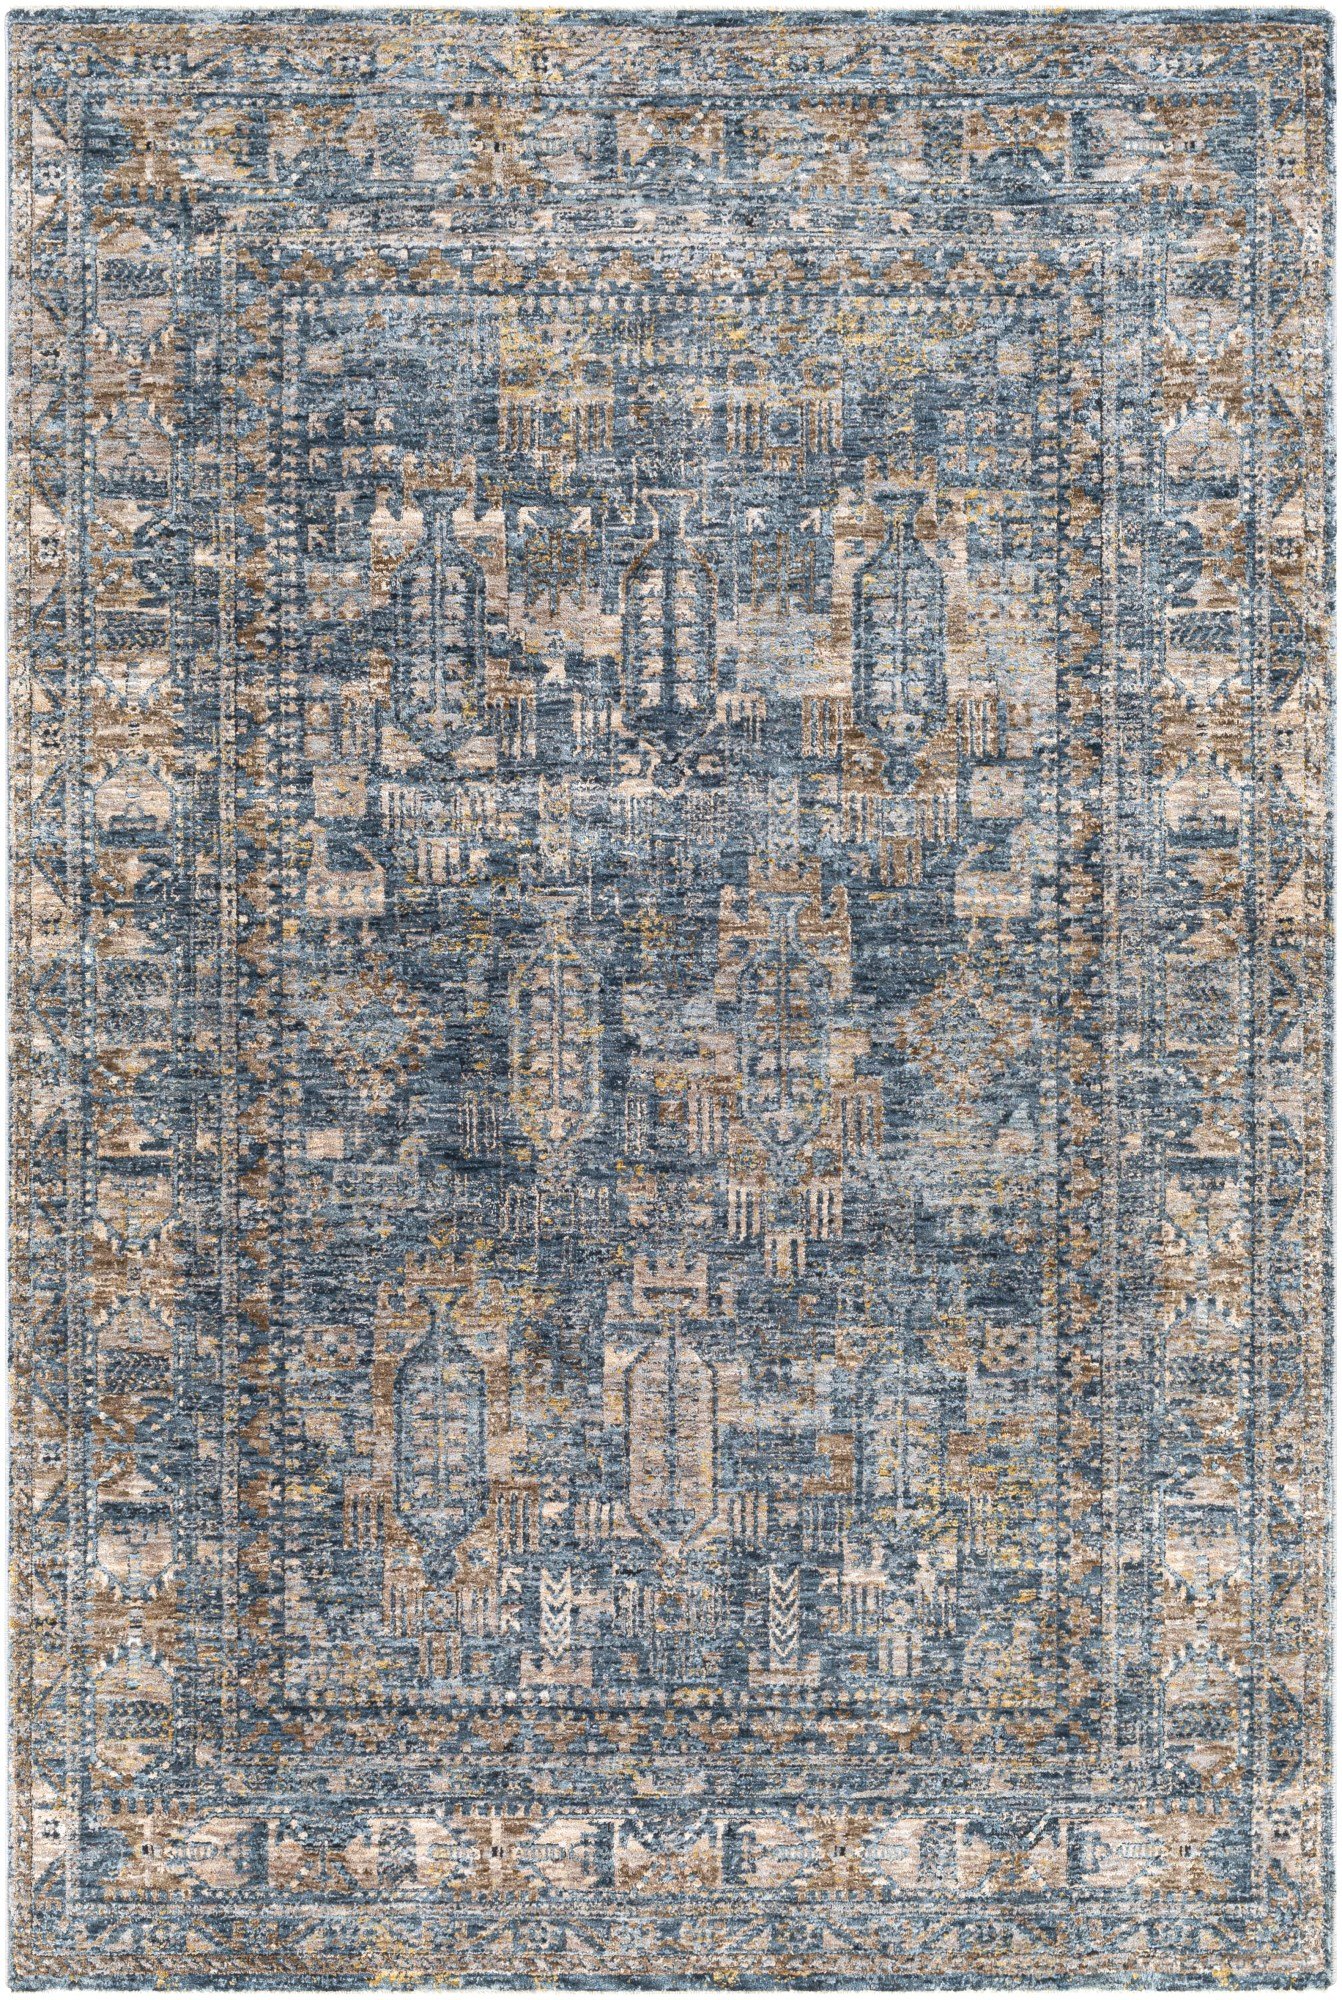 Blue Area Rugs Direct, Blue And Beige Area Rugs